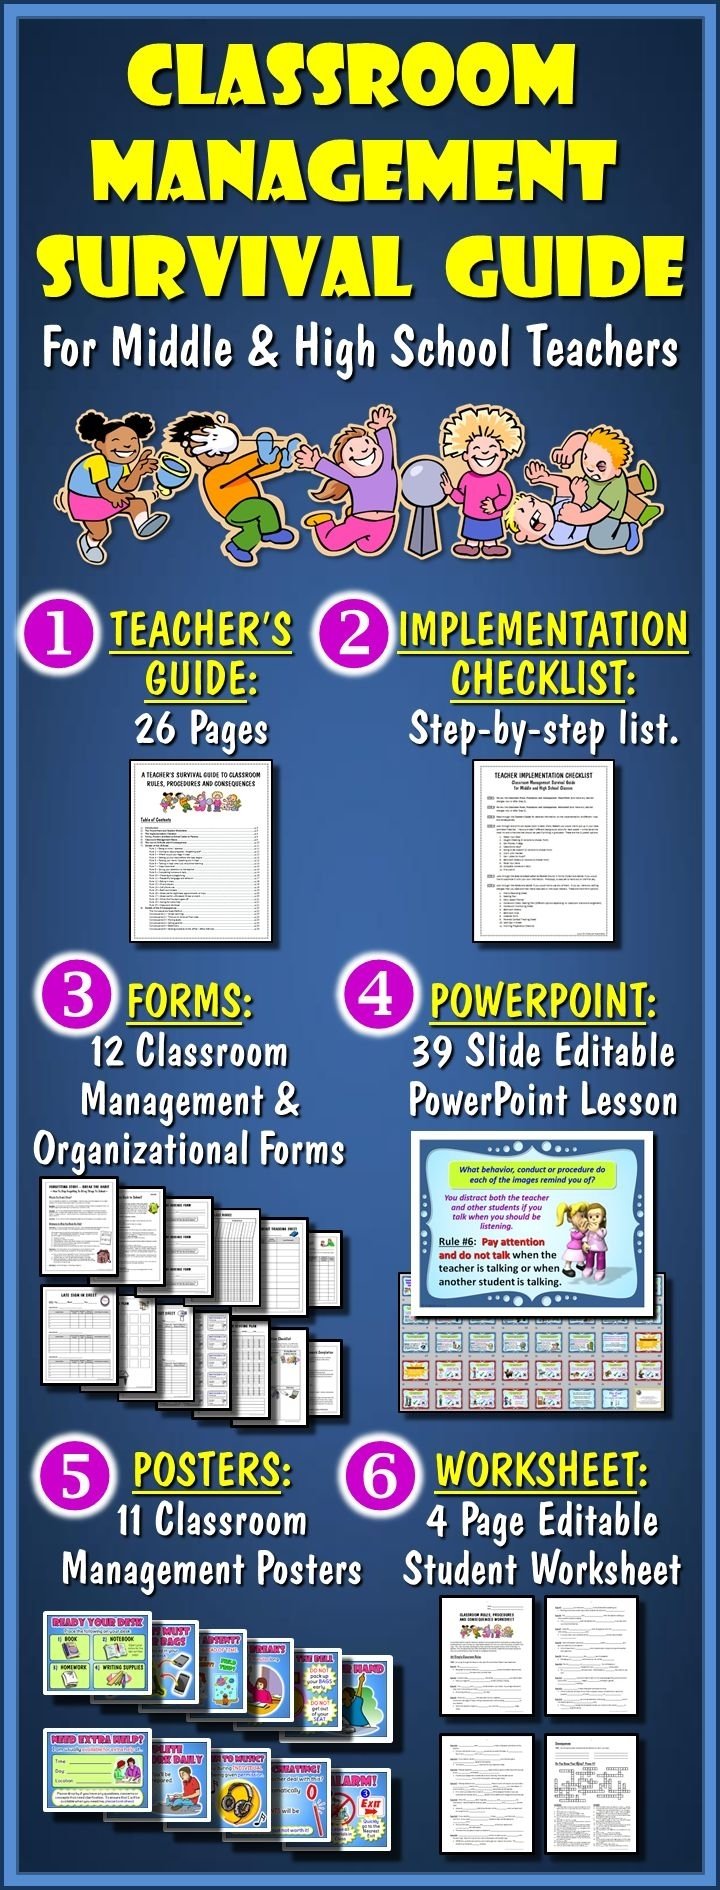 10 Lovely Middle School Classroom Management Ideas 40 best teacher survival kits or guides images on pinterest 1 2022